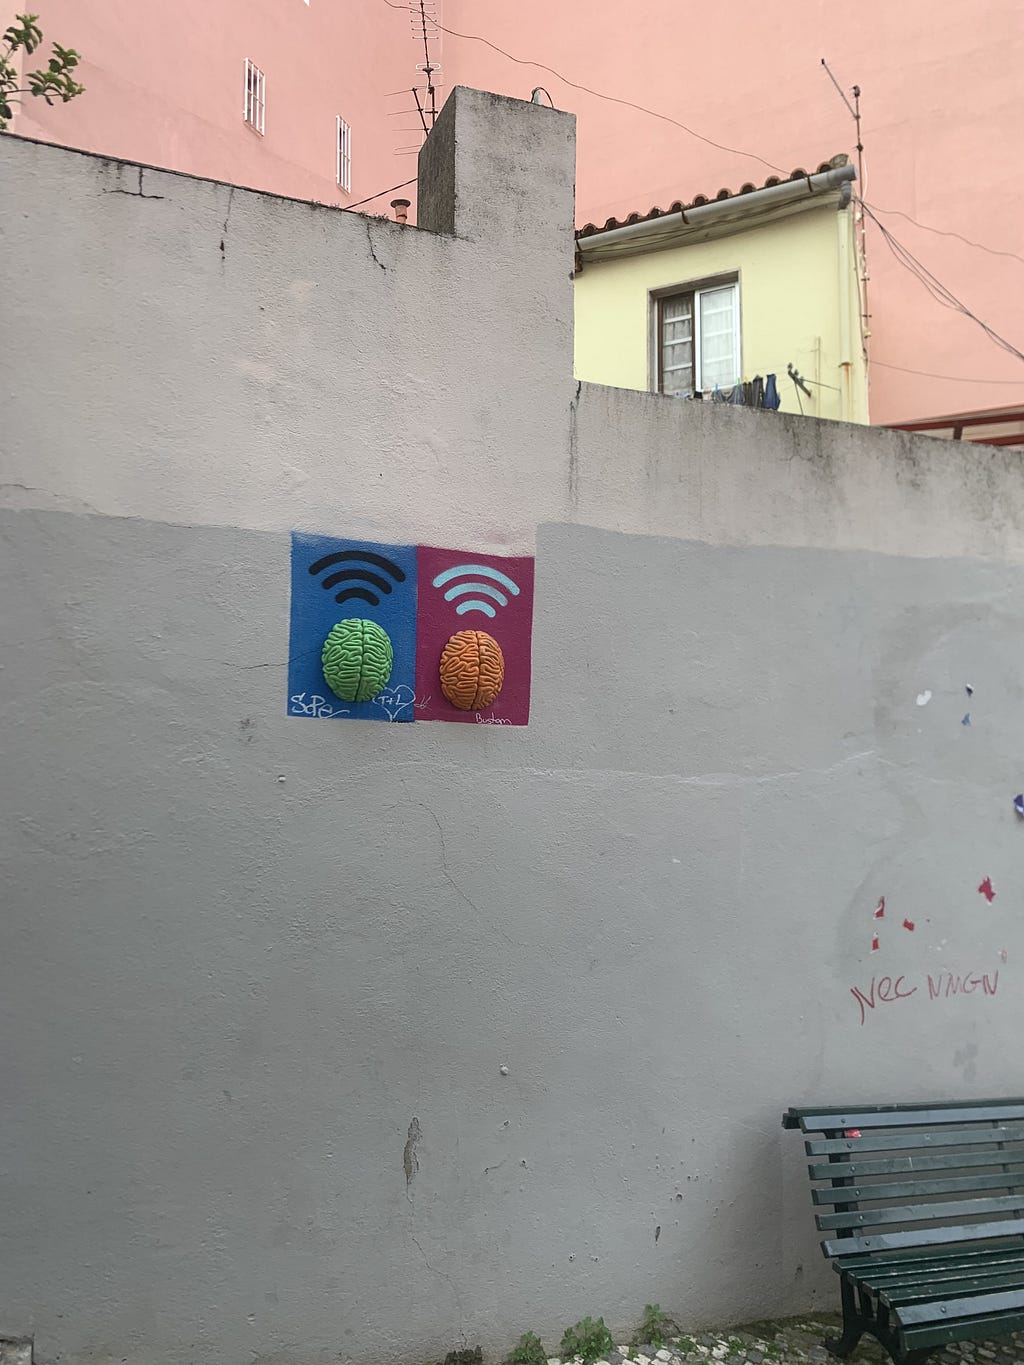 Weird art on the wall: two colorful brains with WIFI signal painted above.